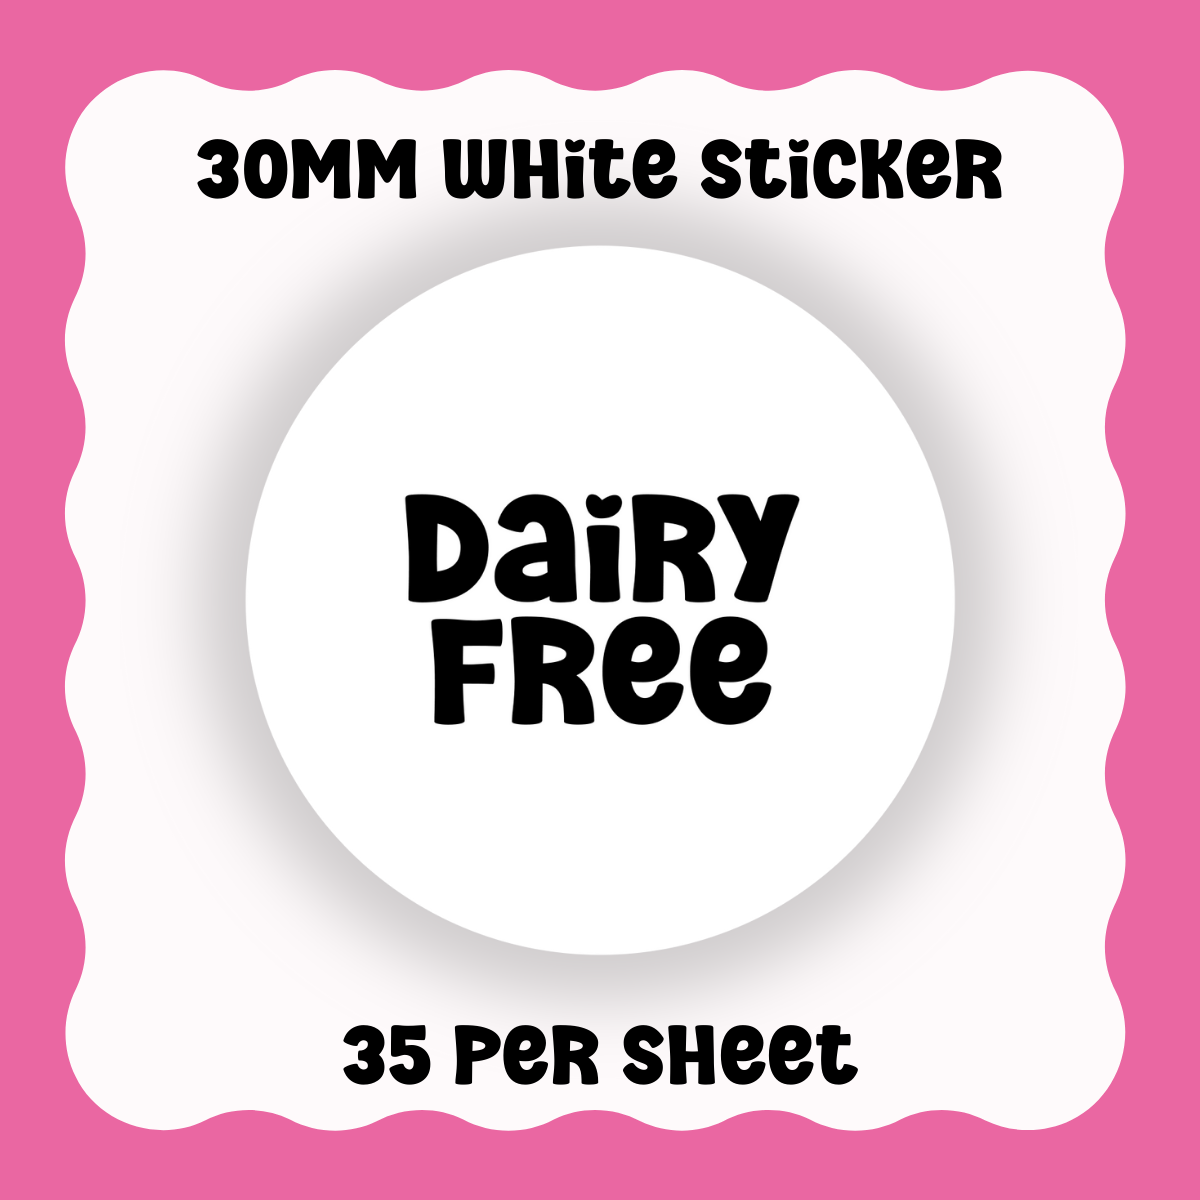 Dairy Free Stickers - Text only